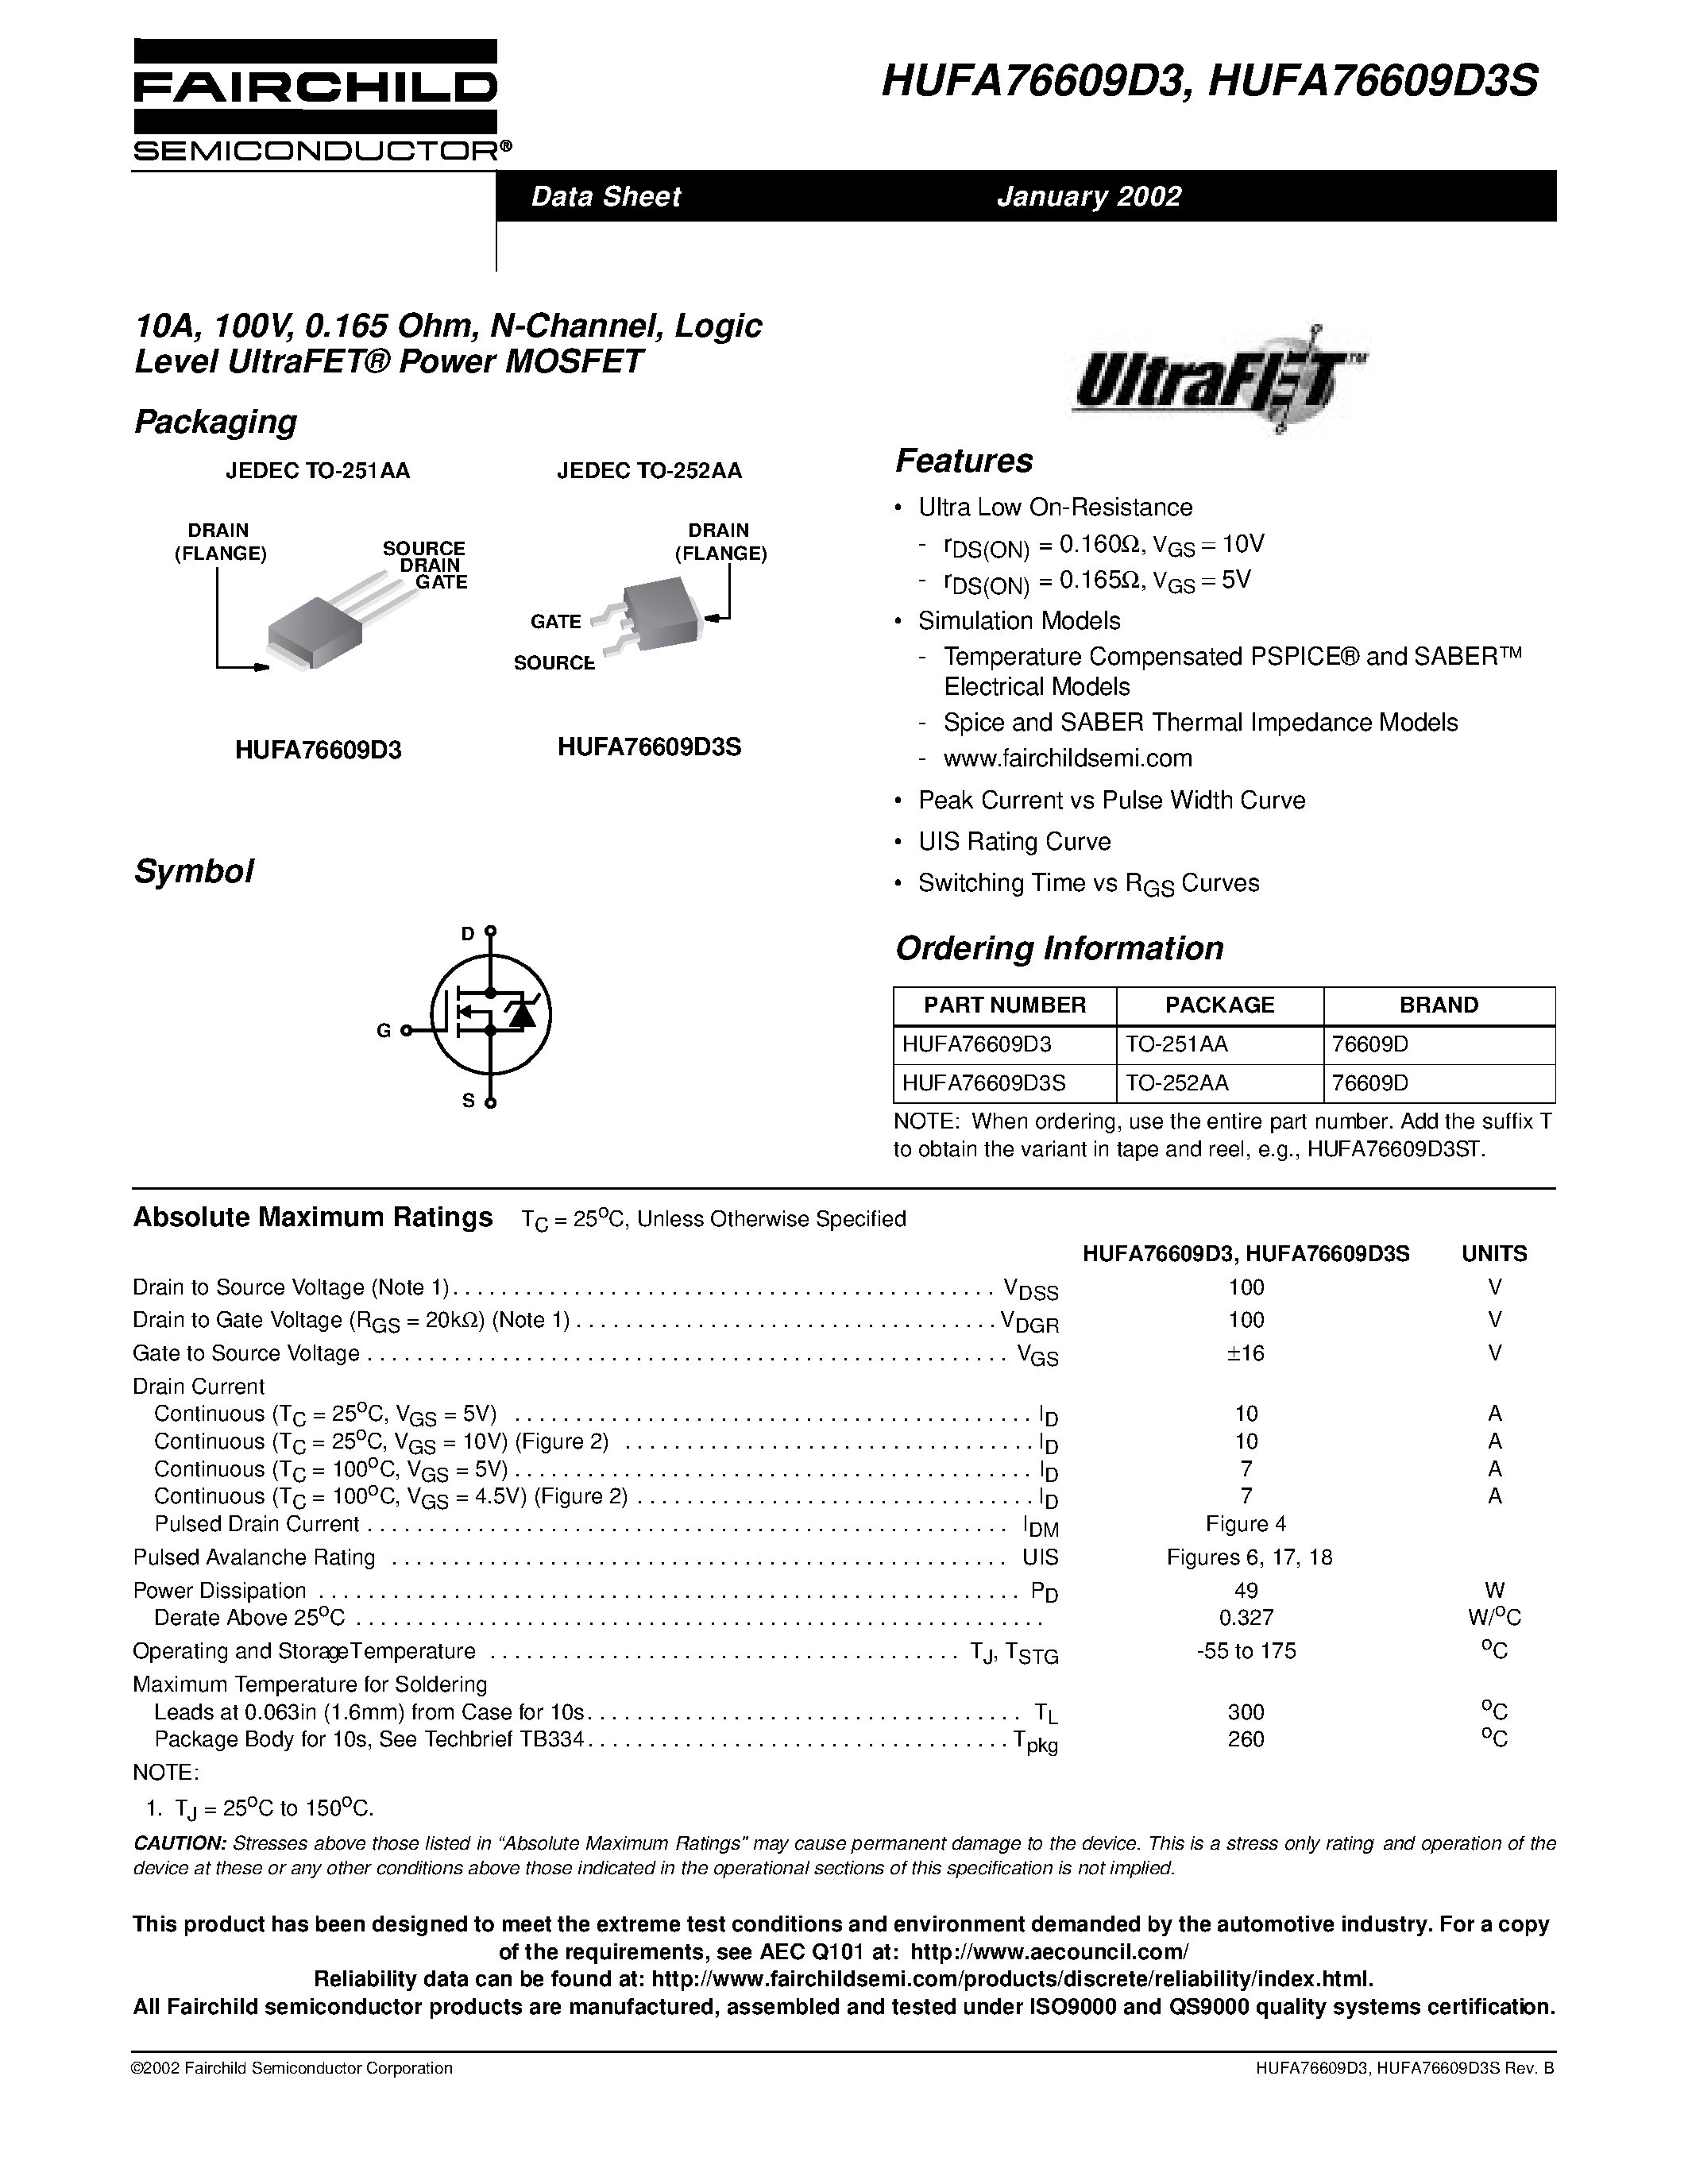 Datasheet HUFA76609D3 - 10A/ 100V/ 0.165 Ohm/ N-Channel/ Logic Level UltraFET Power MOSFET page 1